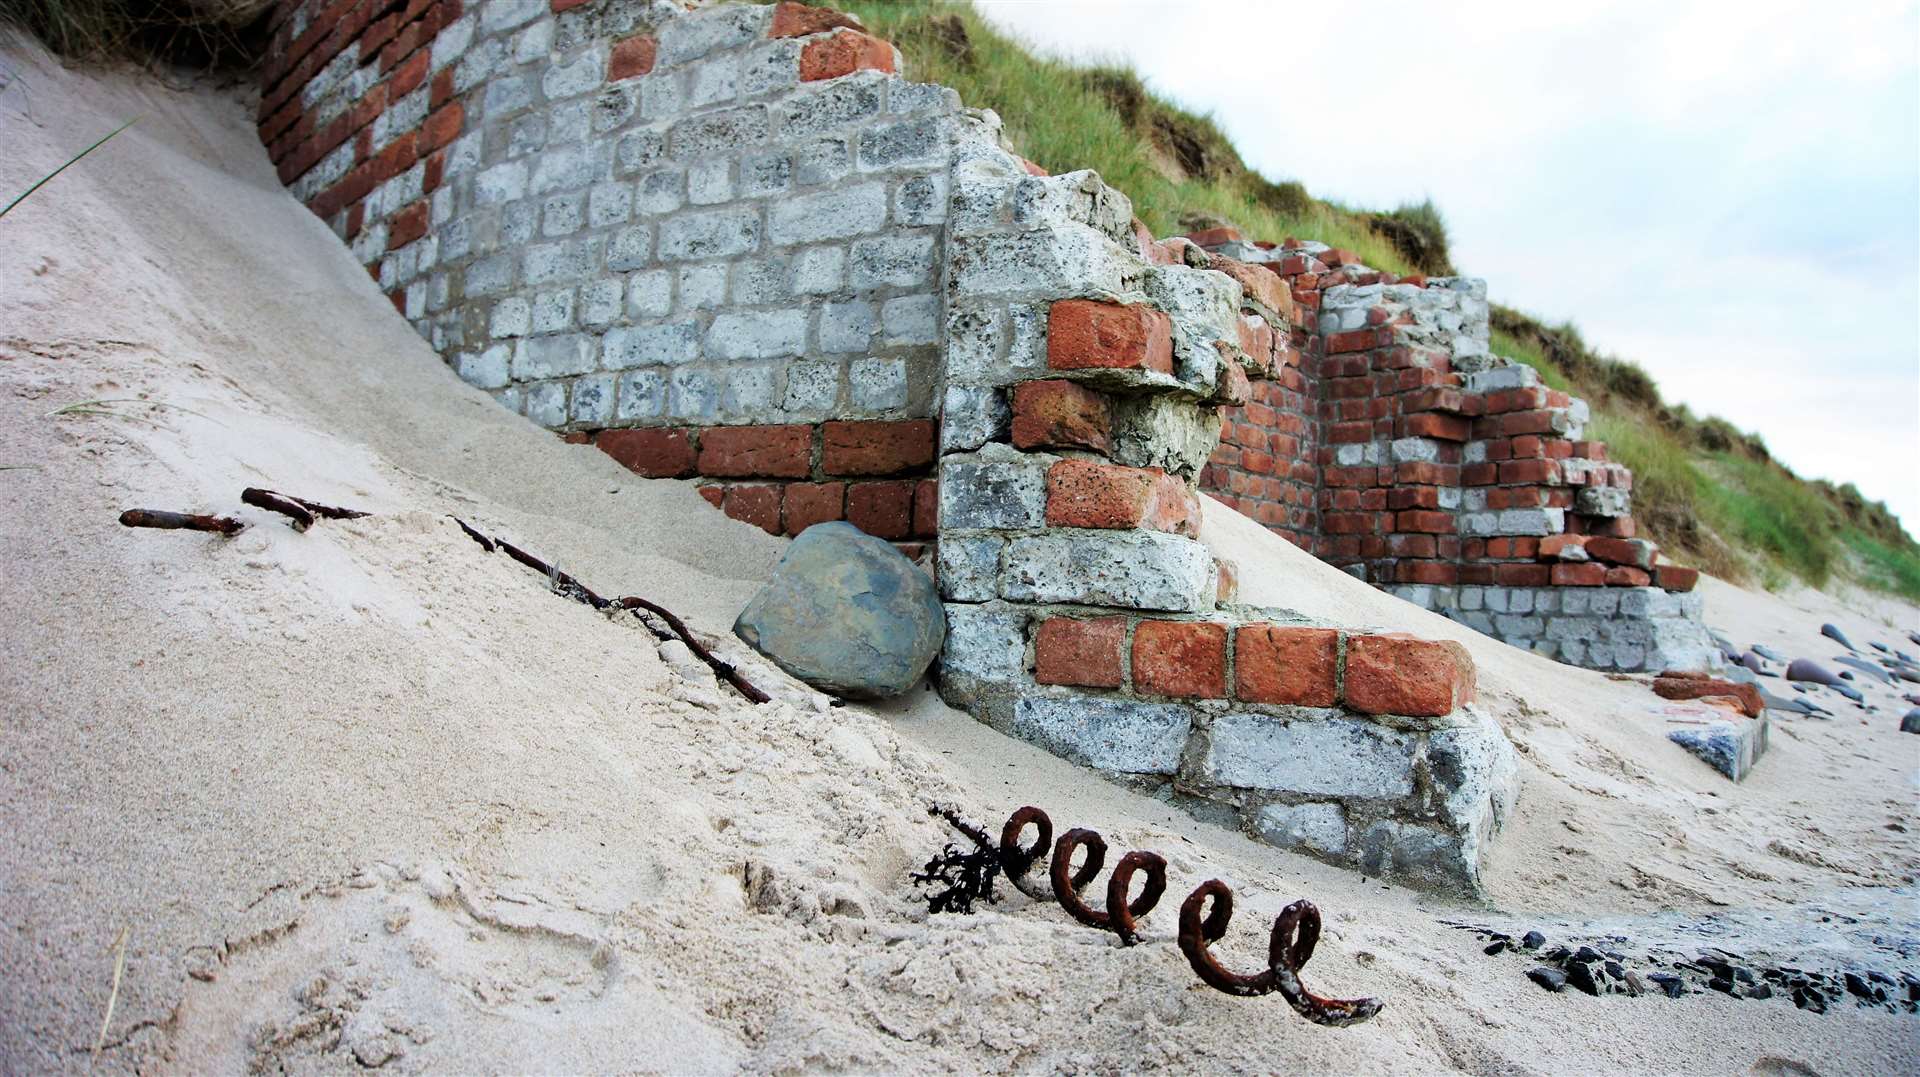 The remains of a pillbox and a corkscrew picket used for mounting barbed wire on Reiss beach – remnants of the global conflict 80 years ago. Picture: DGS